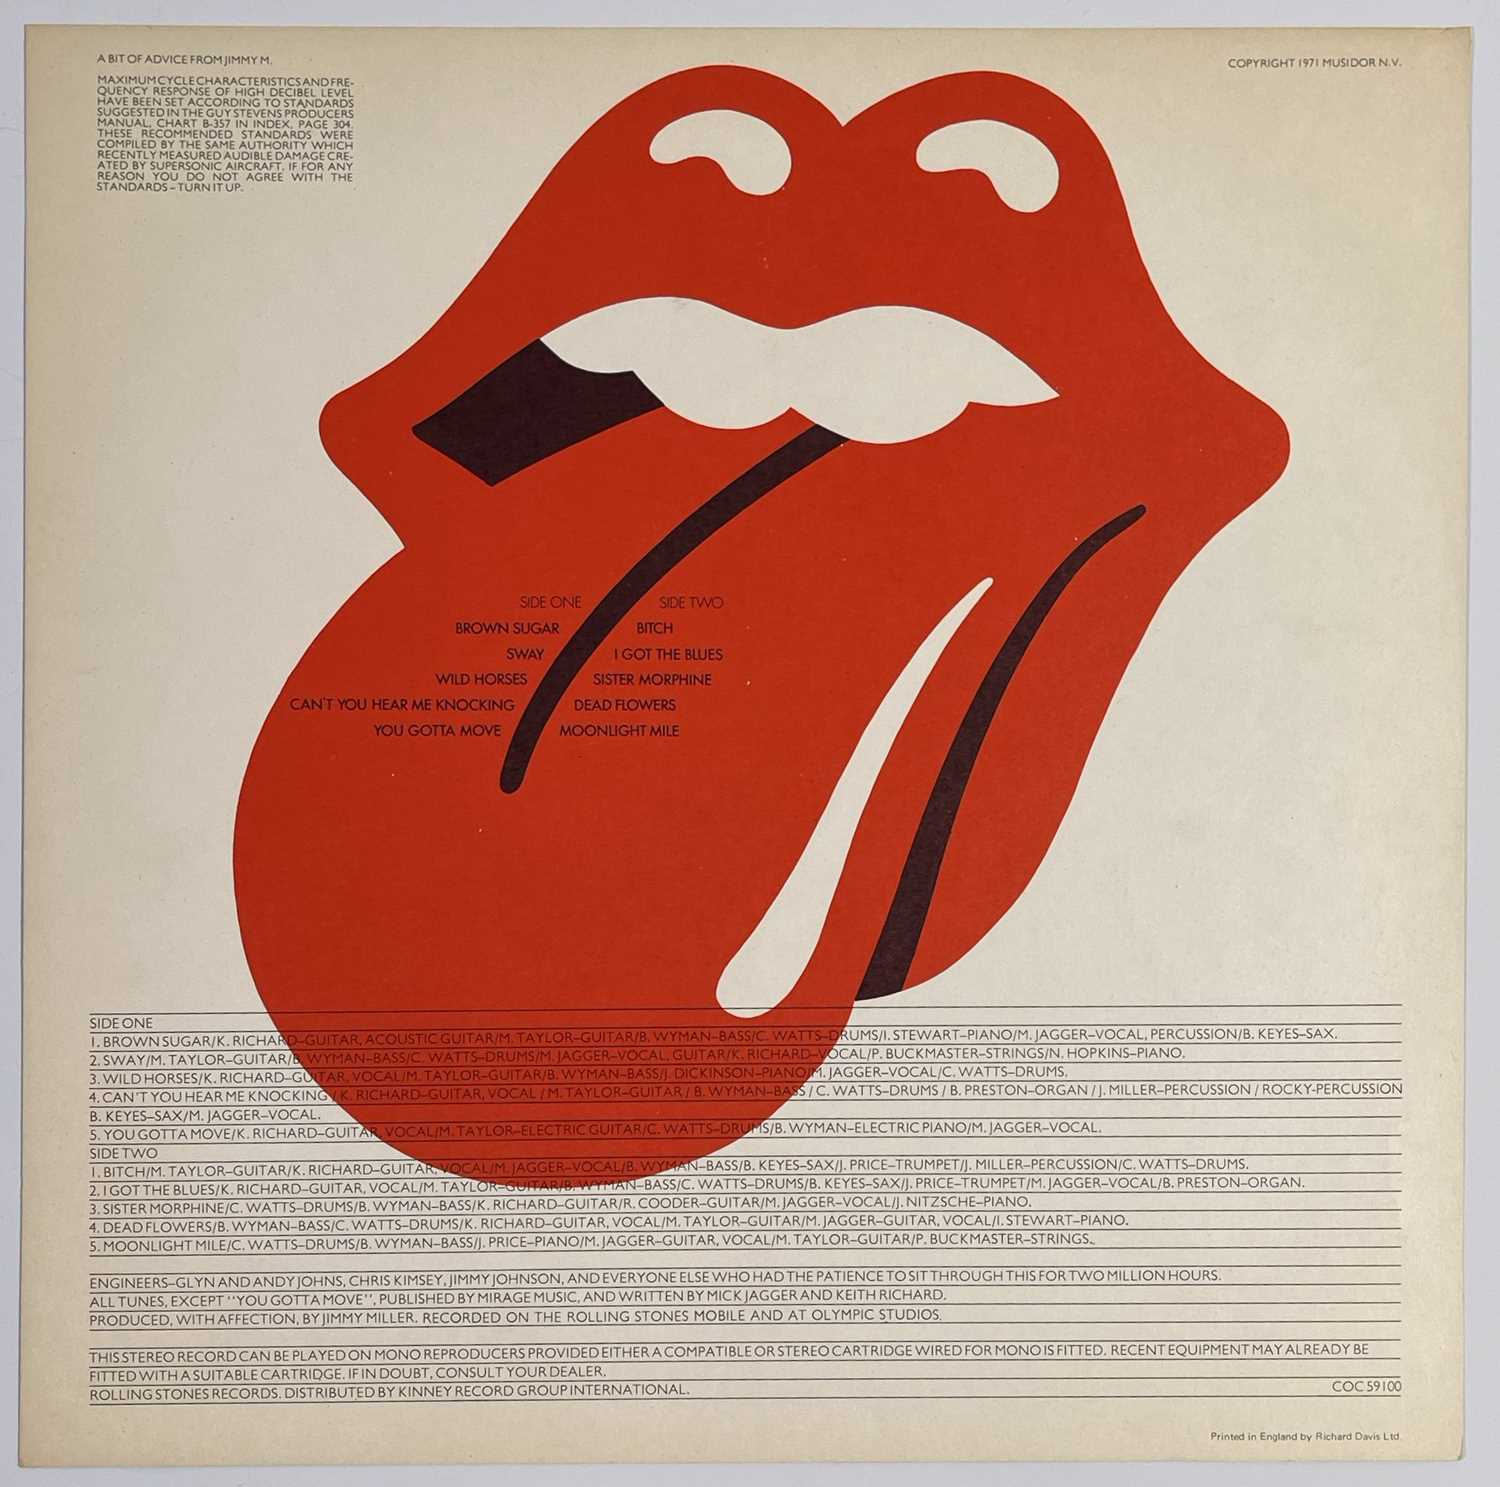 THE ROLLING STONES - STICKY FINGERS (LARGE ZIP) SIGNED BY MICK TAYLOR. - Image 4 of 6